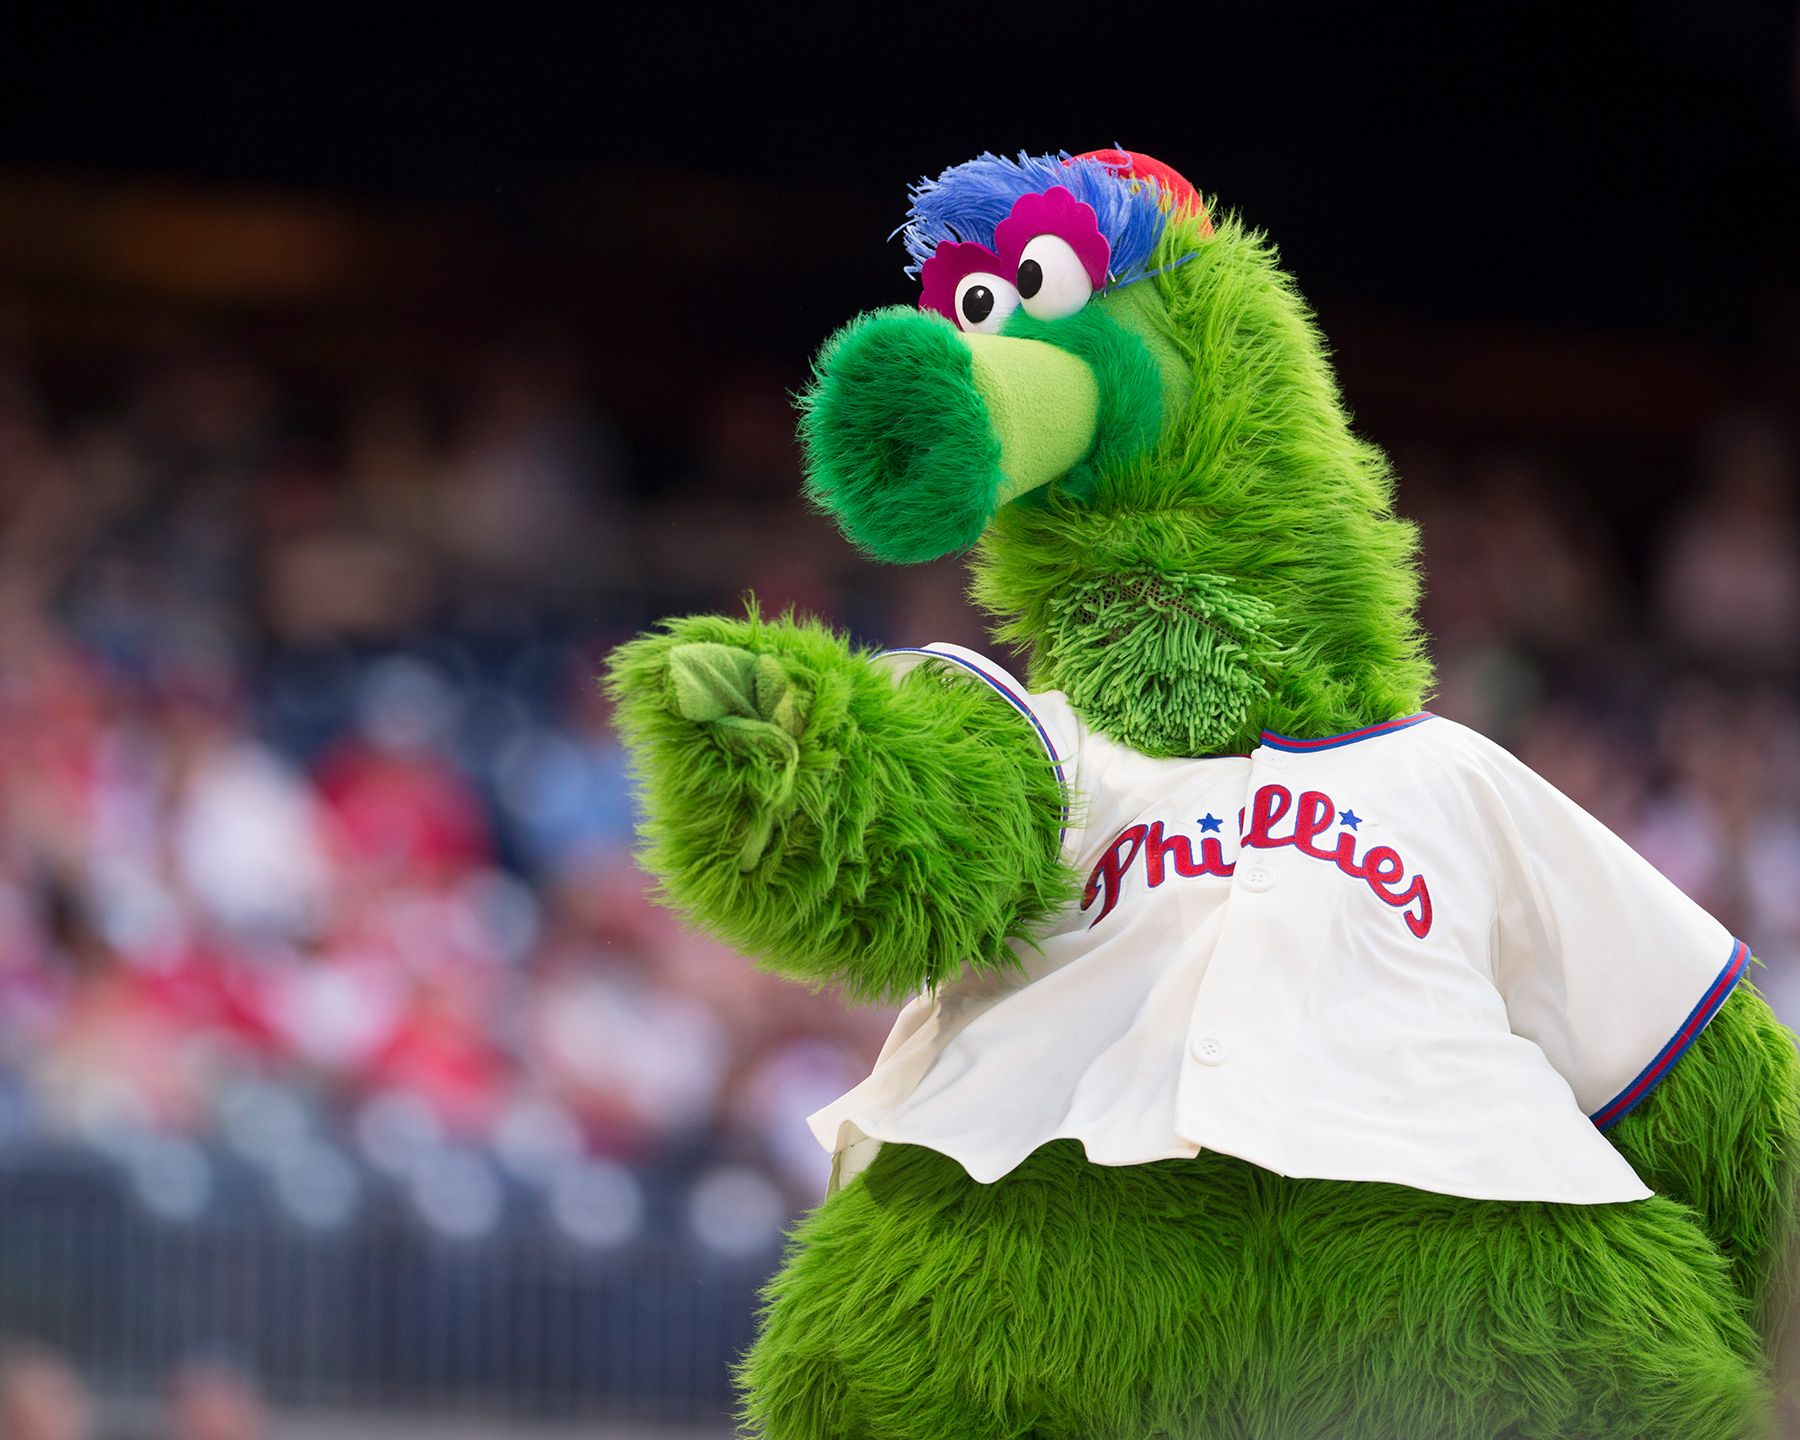 Calum Scott shouts out Phillies fans after 'Dancing On My Own